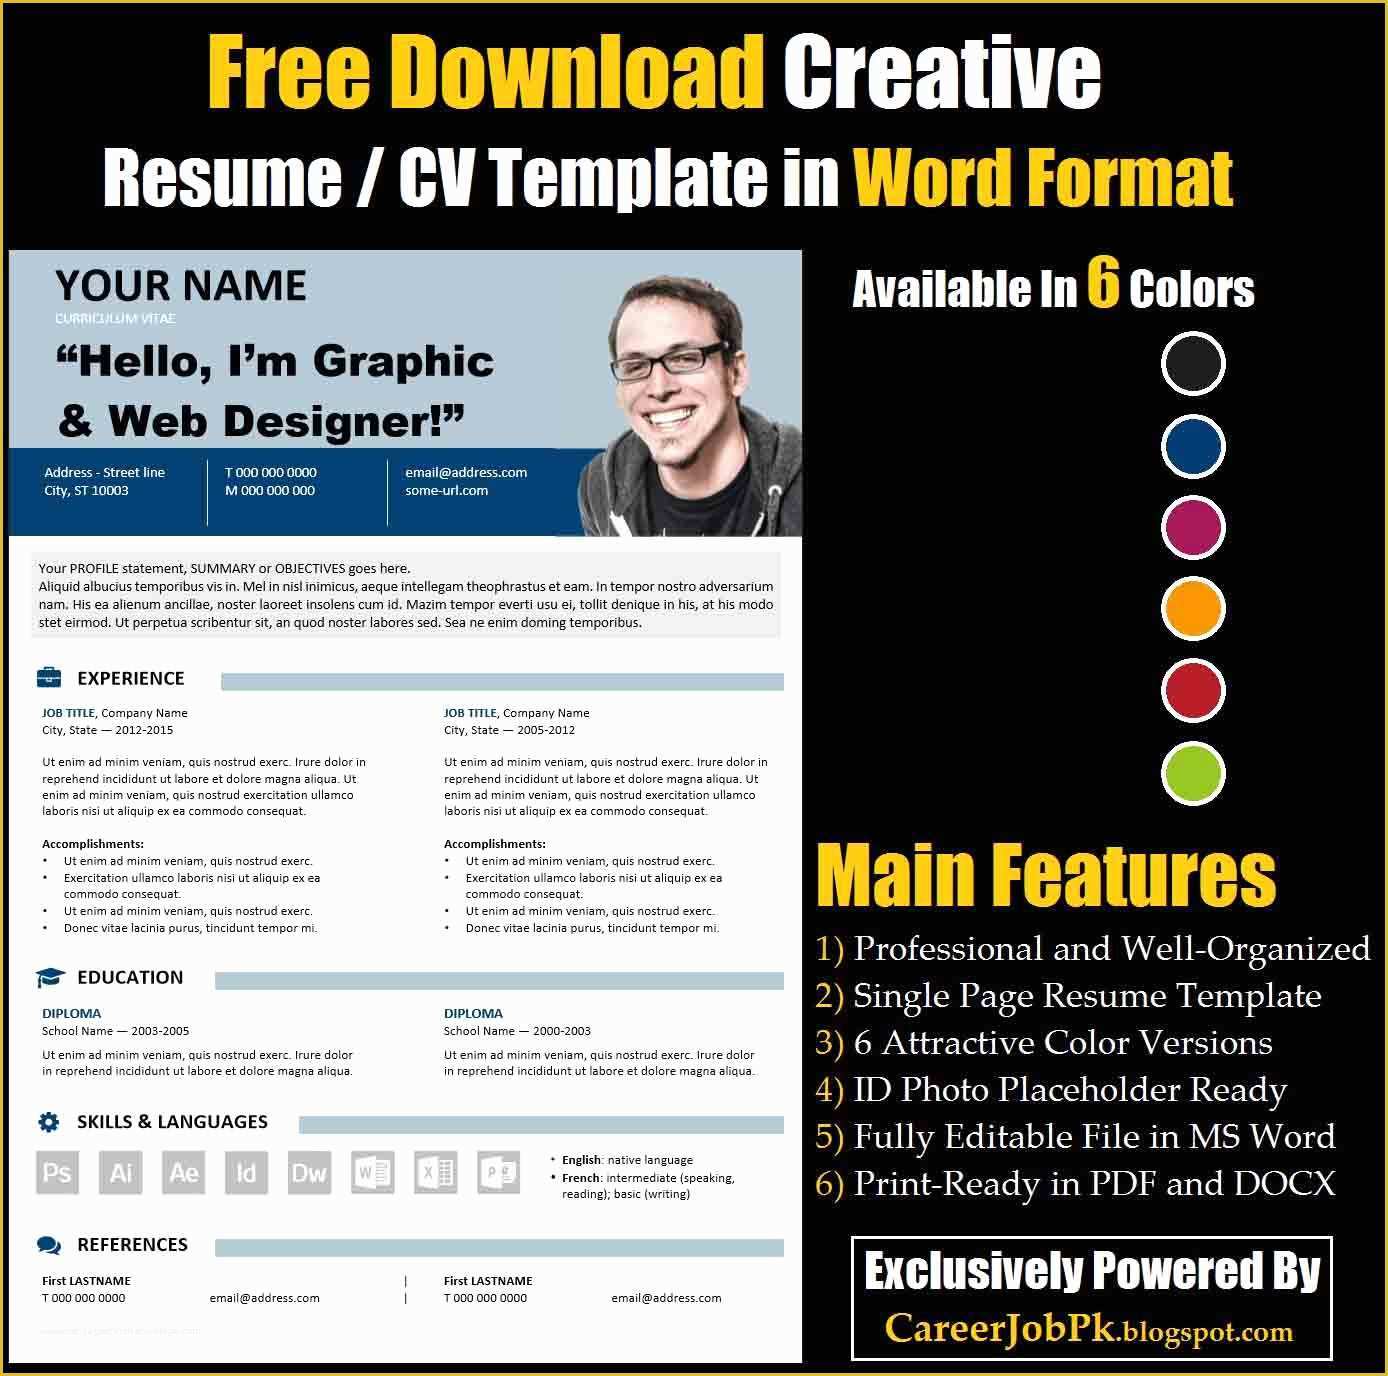 Free Creative Resume Templates Free Download Of Free Download Editable Resume Cv Template In Ms Word format